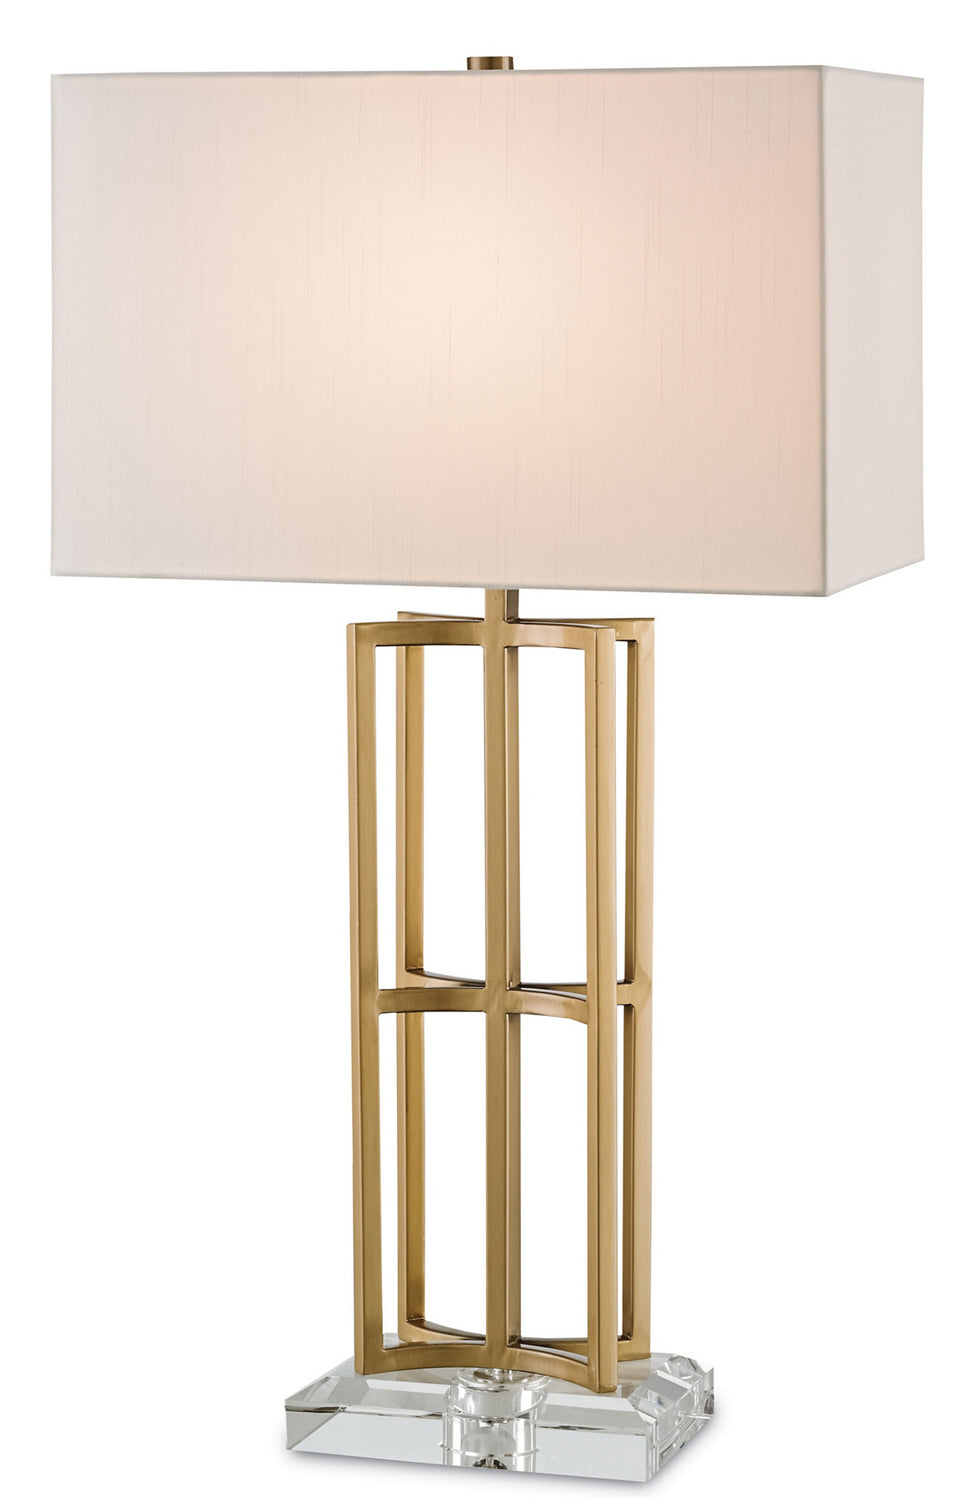 Currey and Company - 6801 - One Light Table Lamp - Devonside